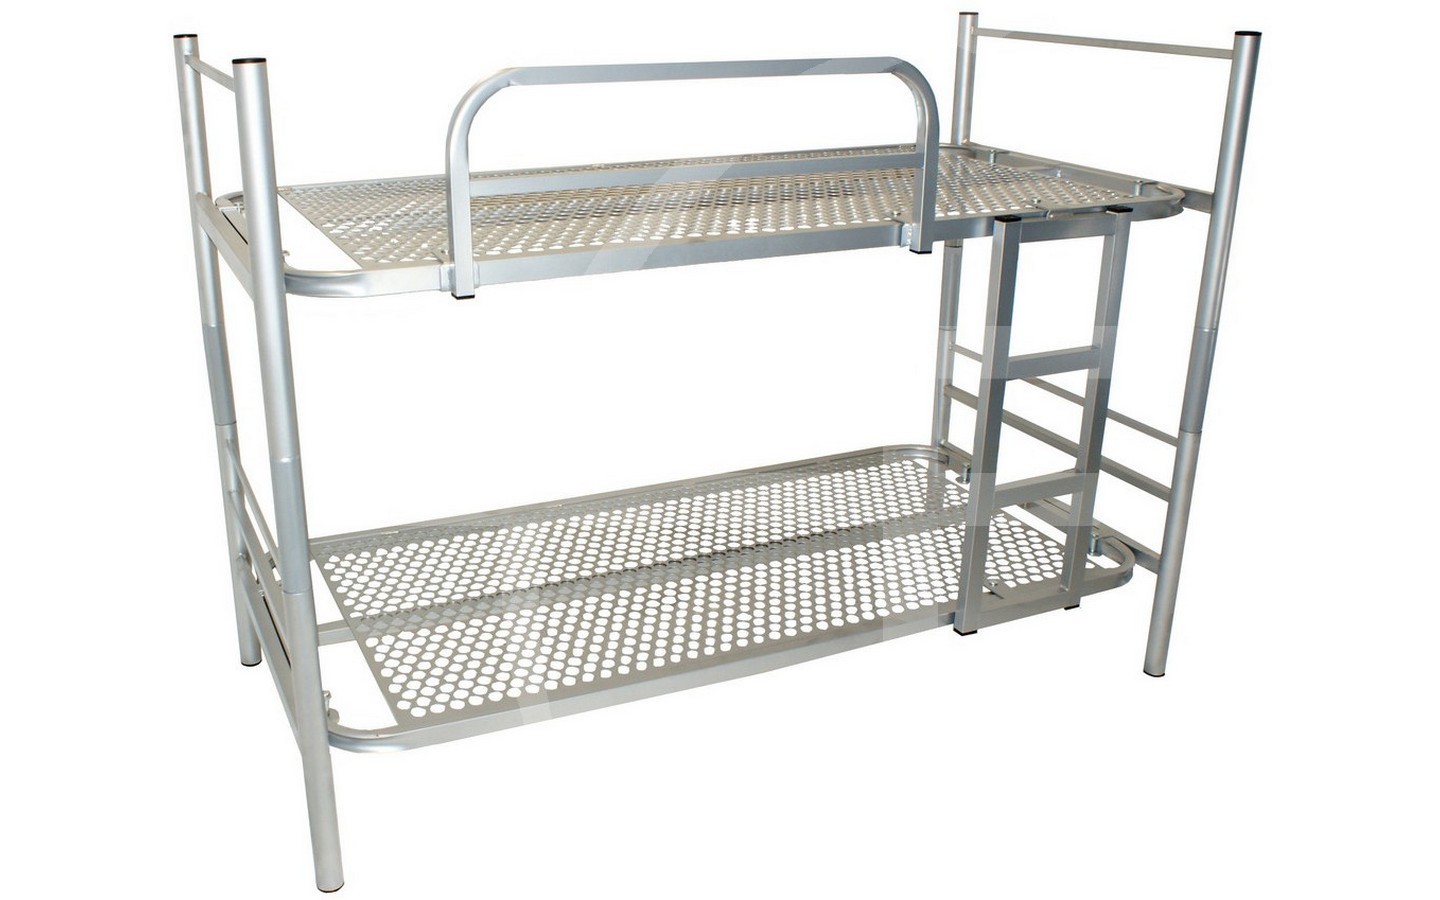 Bunk Beds For S Steel, Military Style Bunk Beds